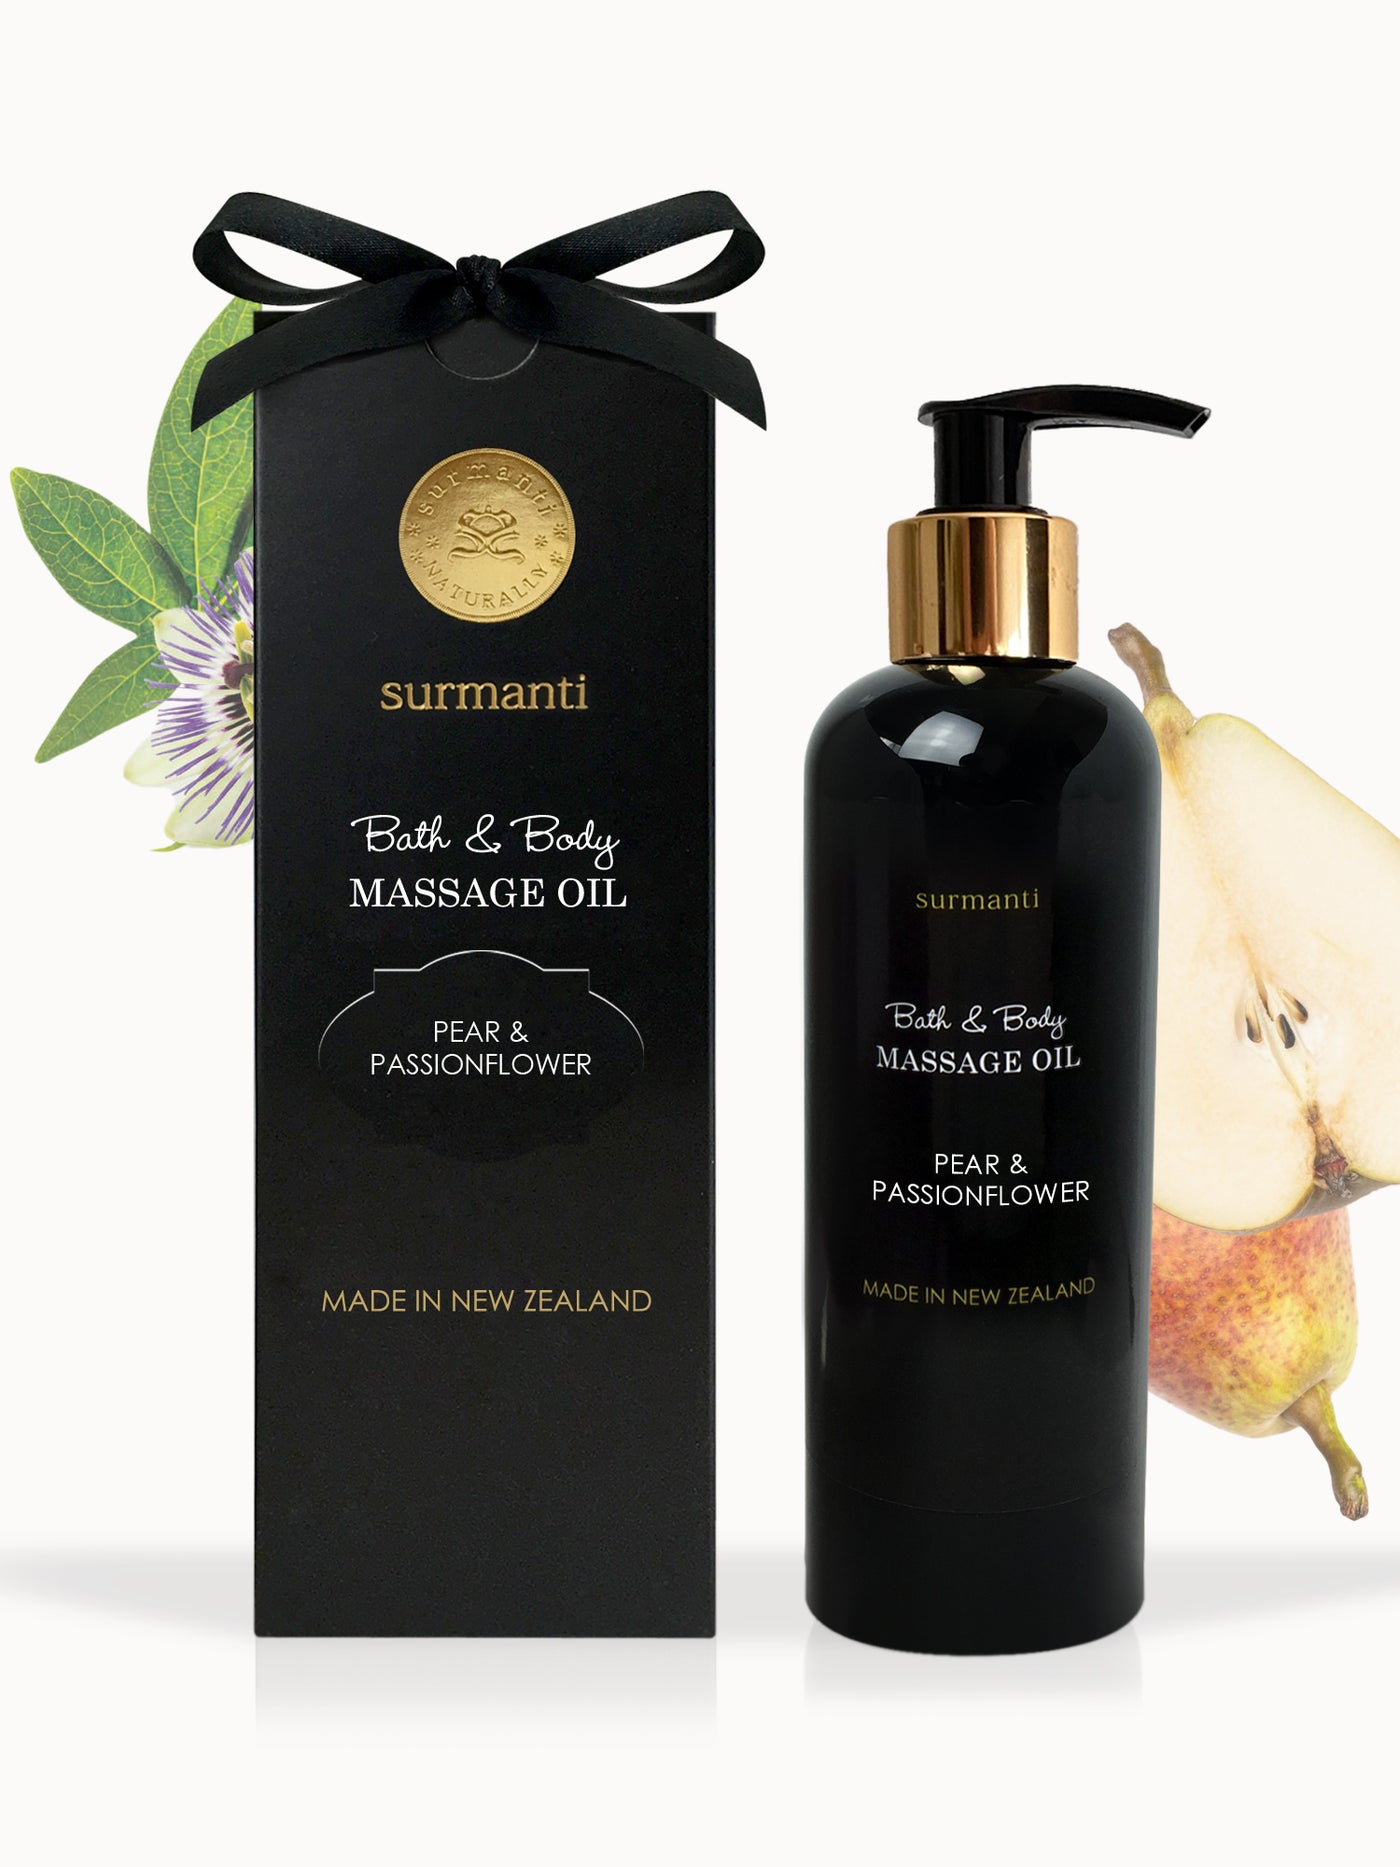 Pear & Passionflower Bath & Body Massage Oil - Surmanti - Made In New Zealand